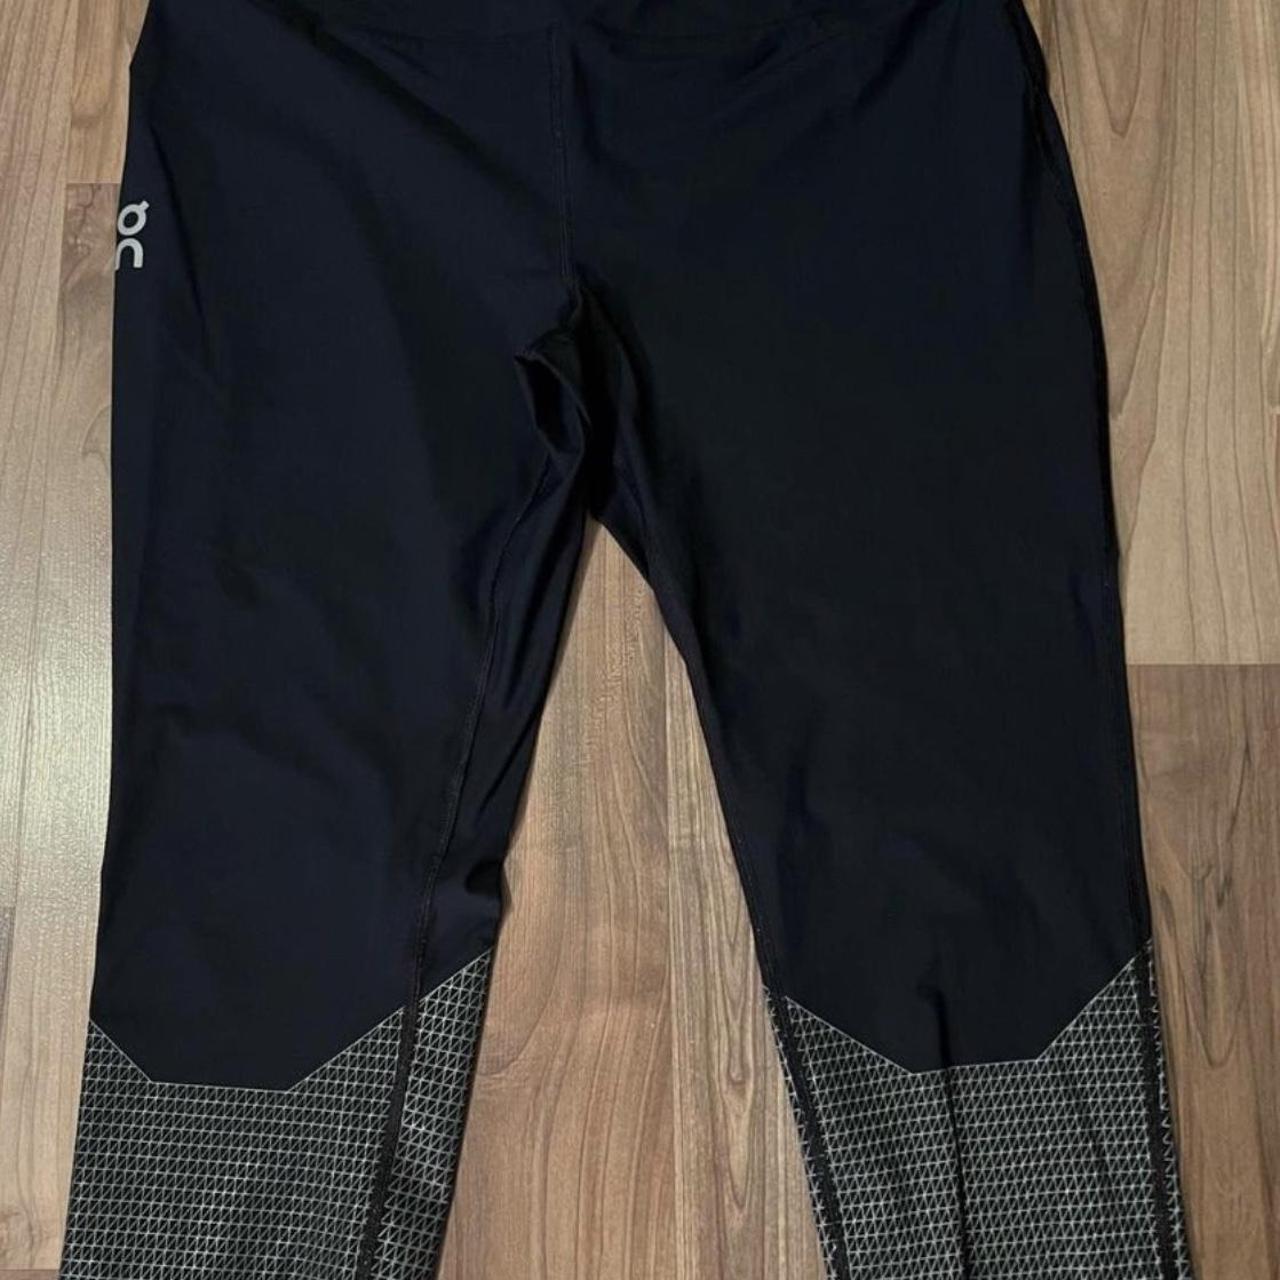 ON Running Tights Leggings Size XL Preowned On - Depop